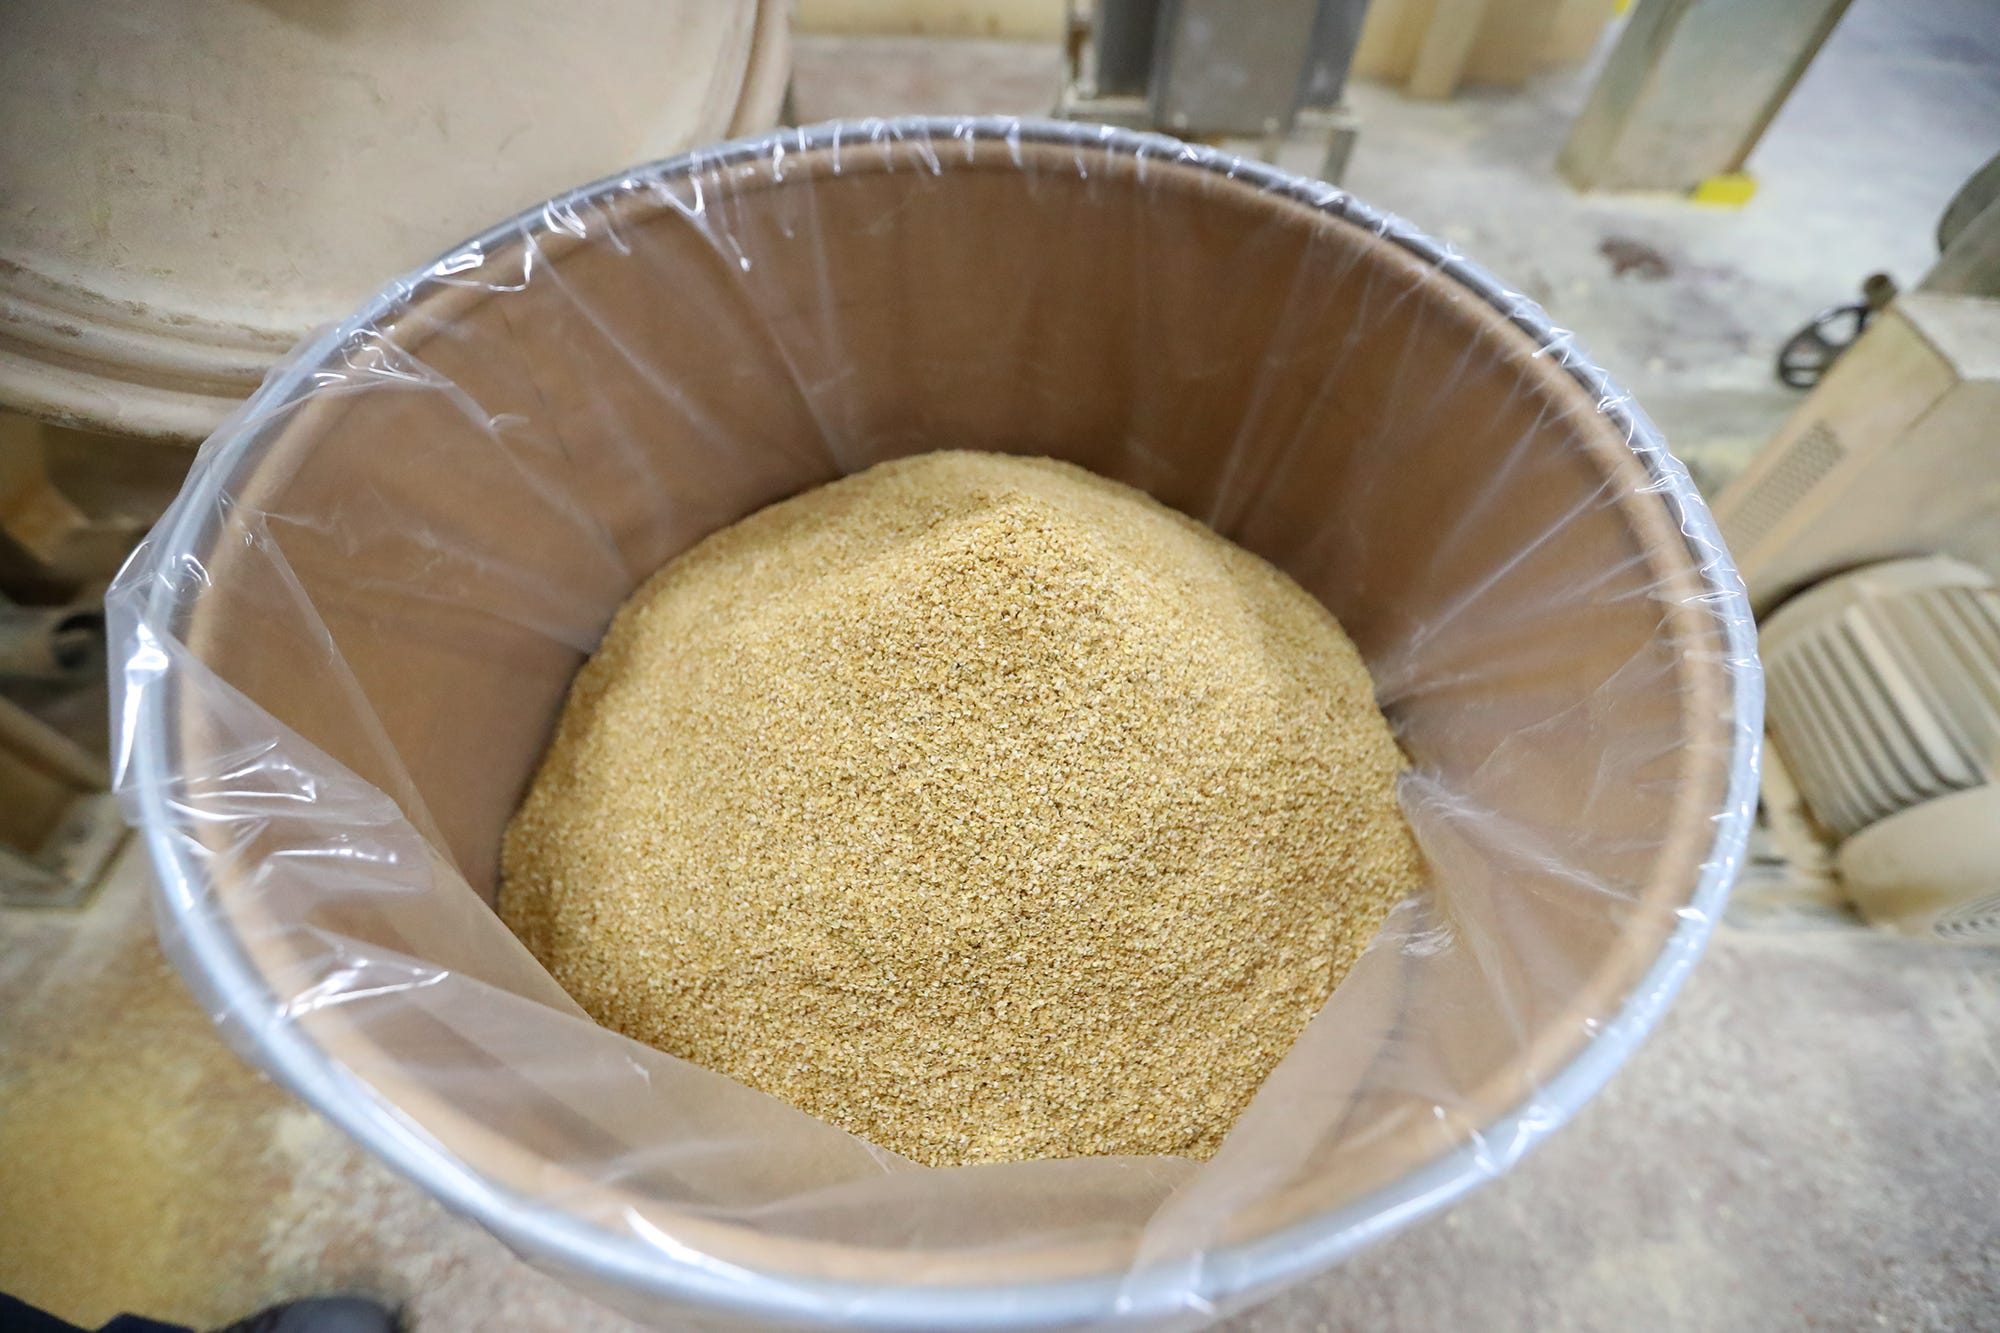 A barrel filled with 125 pounds of mustard bran at Wisconsin Spice is part of the 75 million pounds of mustard products made each year at the Berlin factory.